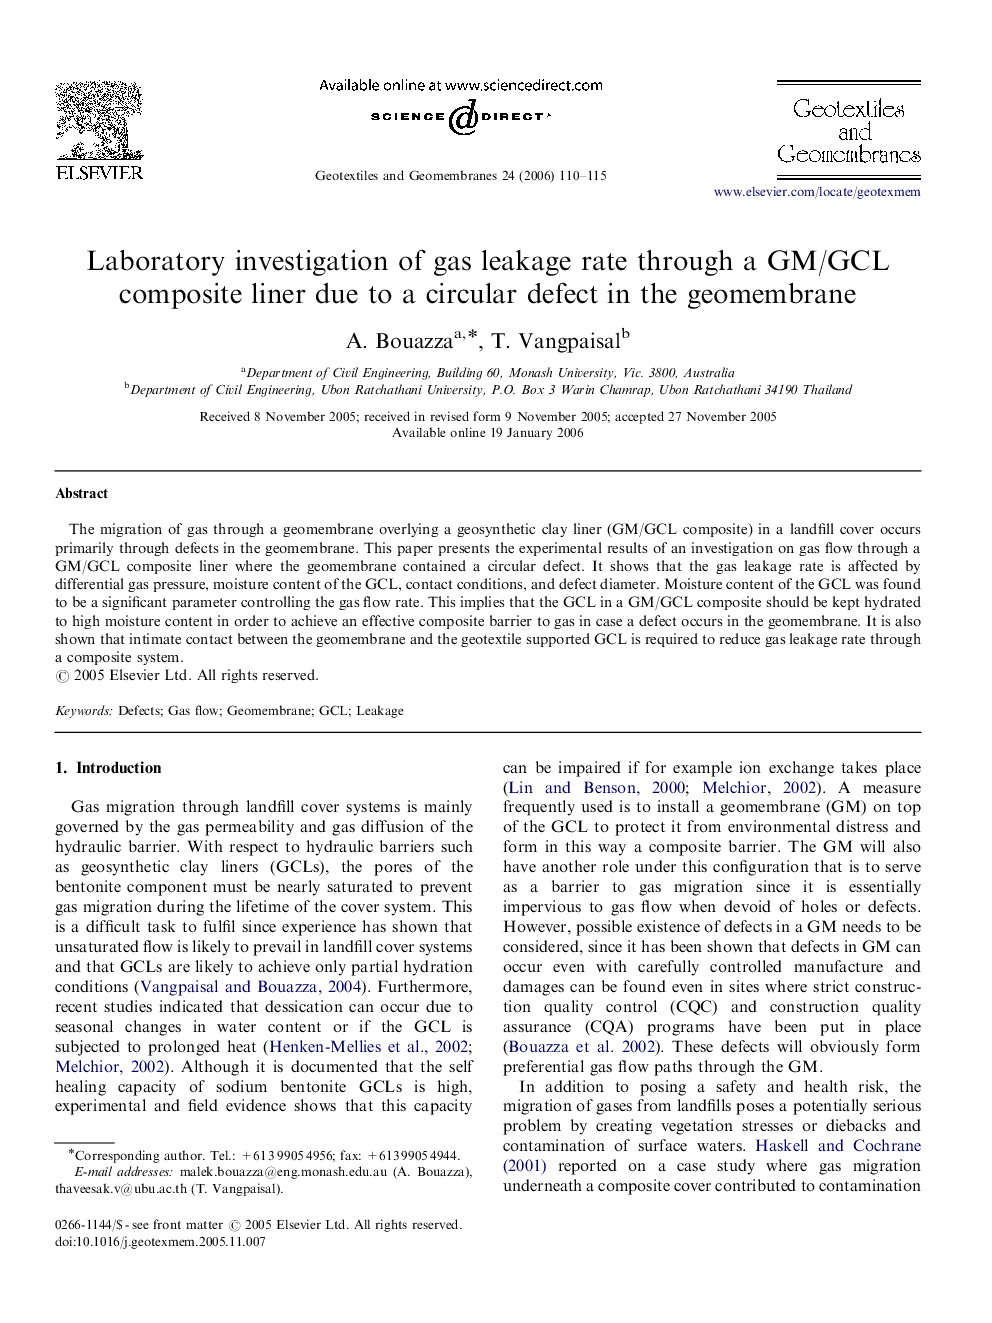 Laboratory investigation of gas leakage rate through a GM/GCL composite liner due to a circular defect in the geomembrane